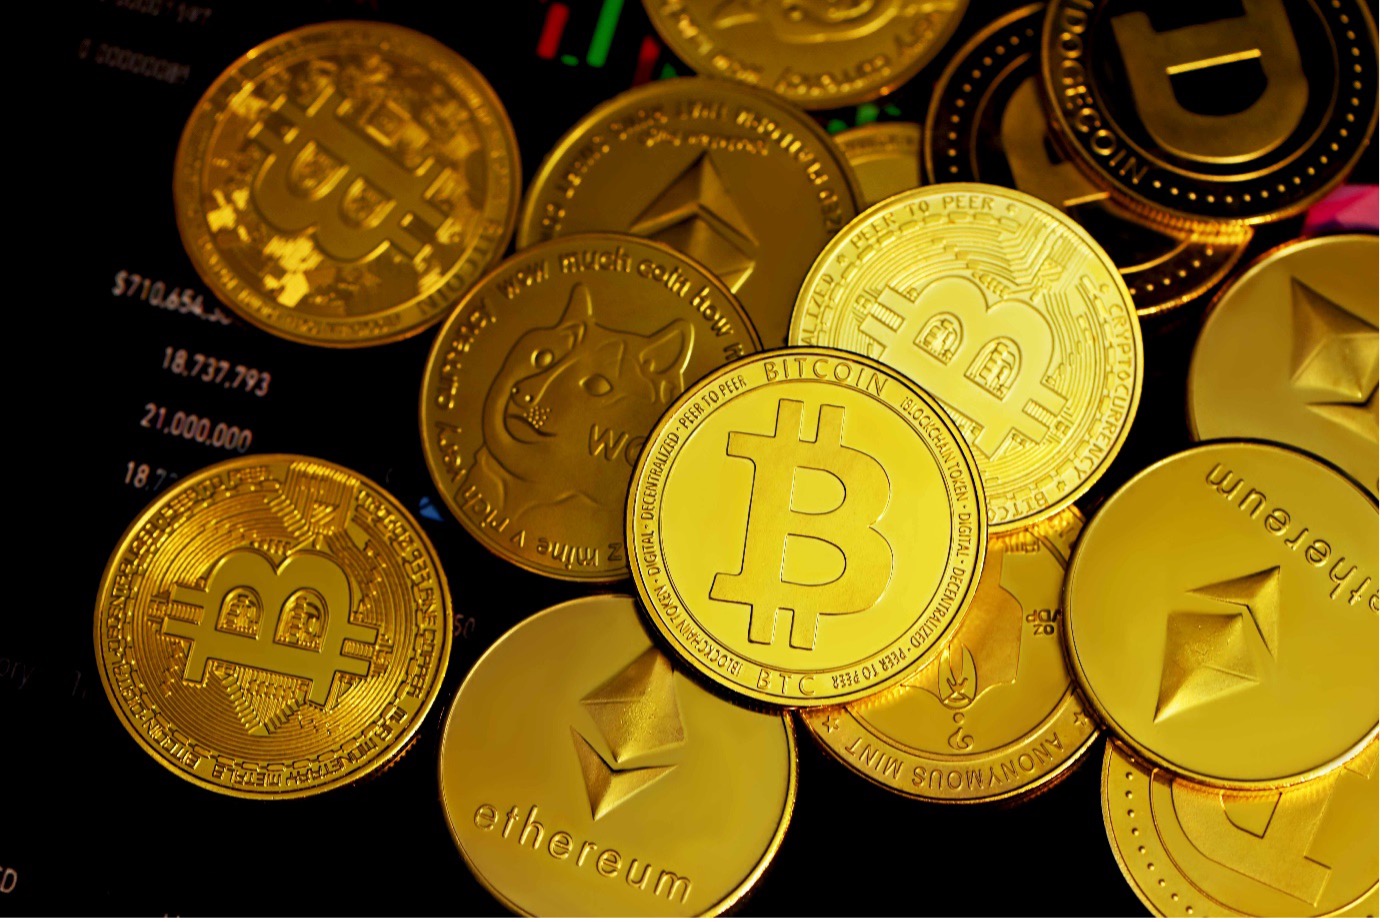 Image of gold coins marked as cryptocurrencies